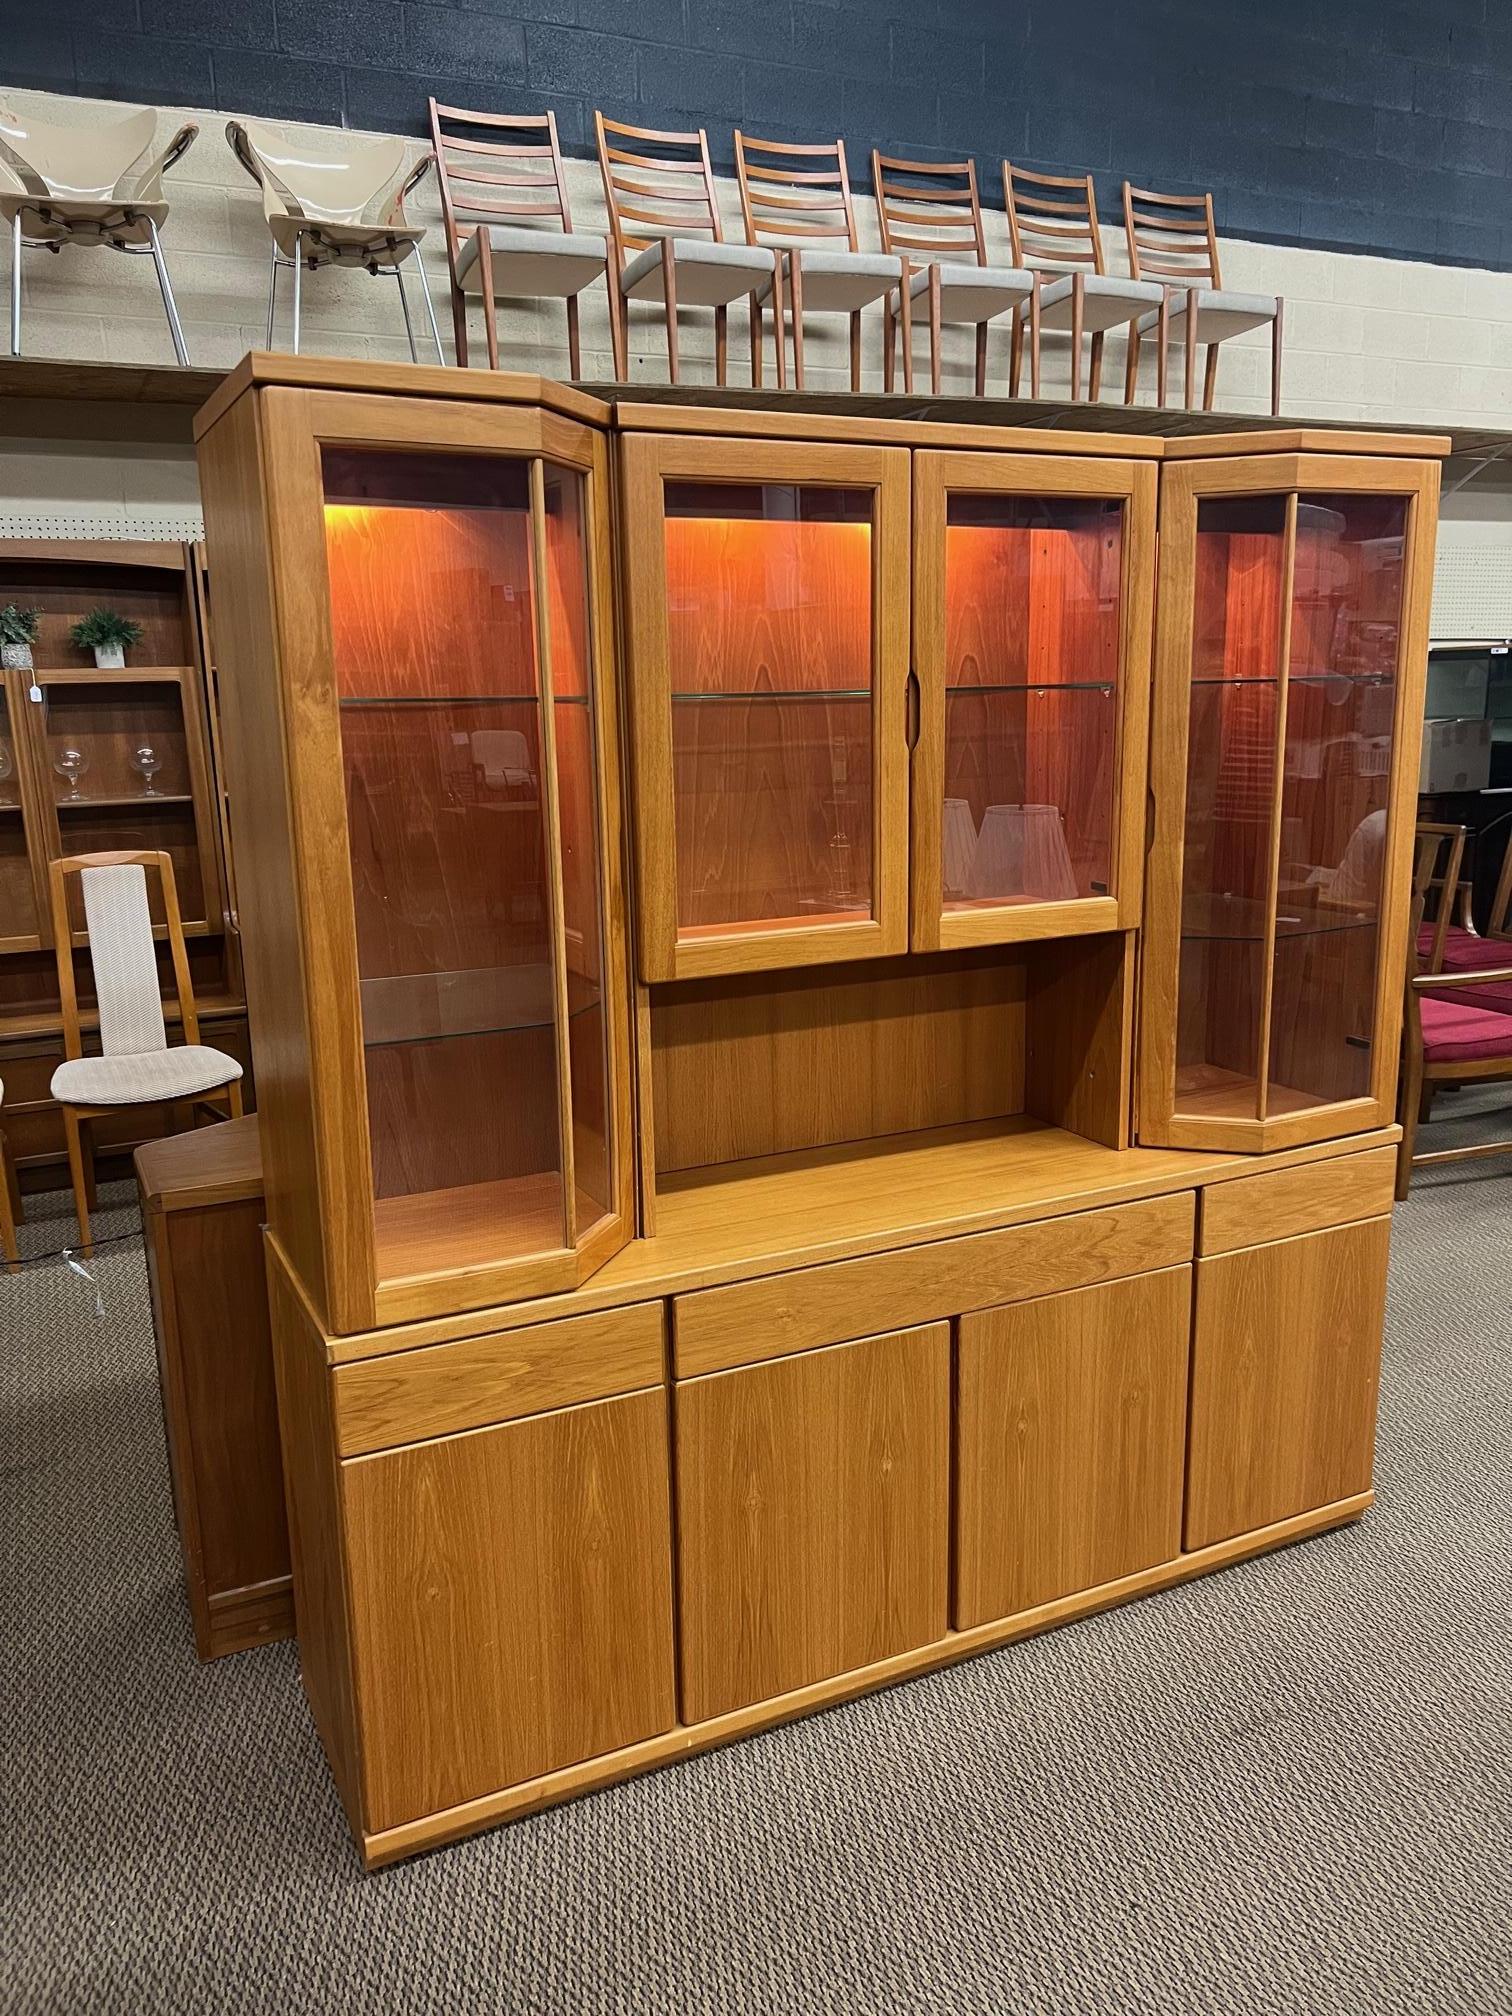 Gorgeous Danish Modern teak buffet with hutch. Fantastic condition. Minor signs of wear. Small chip on the left bottom rear corner, small mark on the bottom piece.

Featuring adjustable glass shelves at the top. Adjustable wood shelves at the bottom